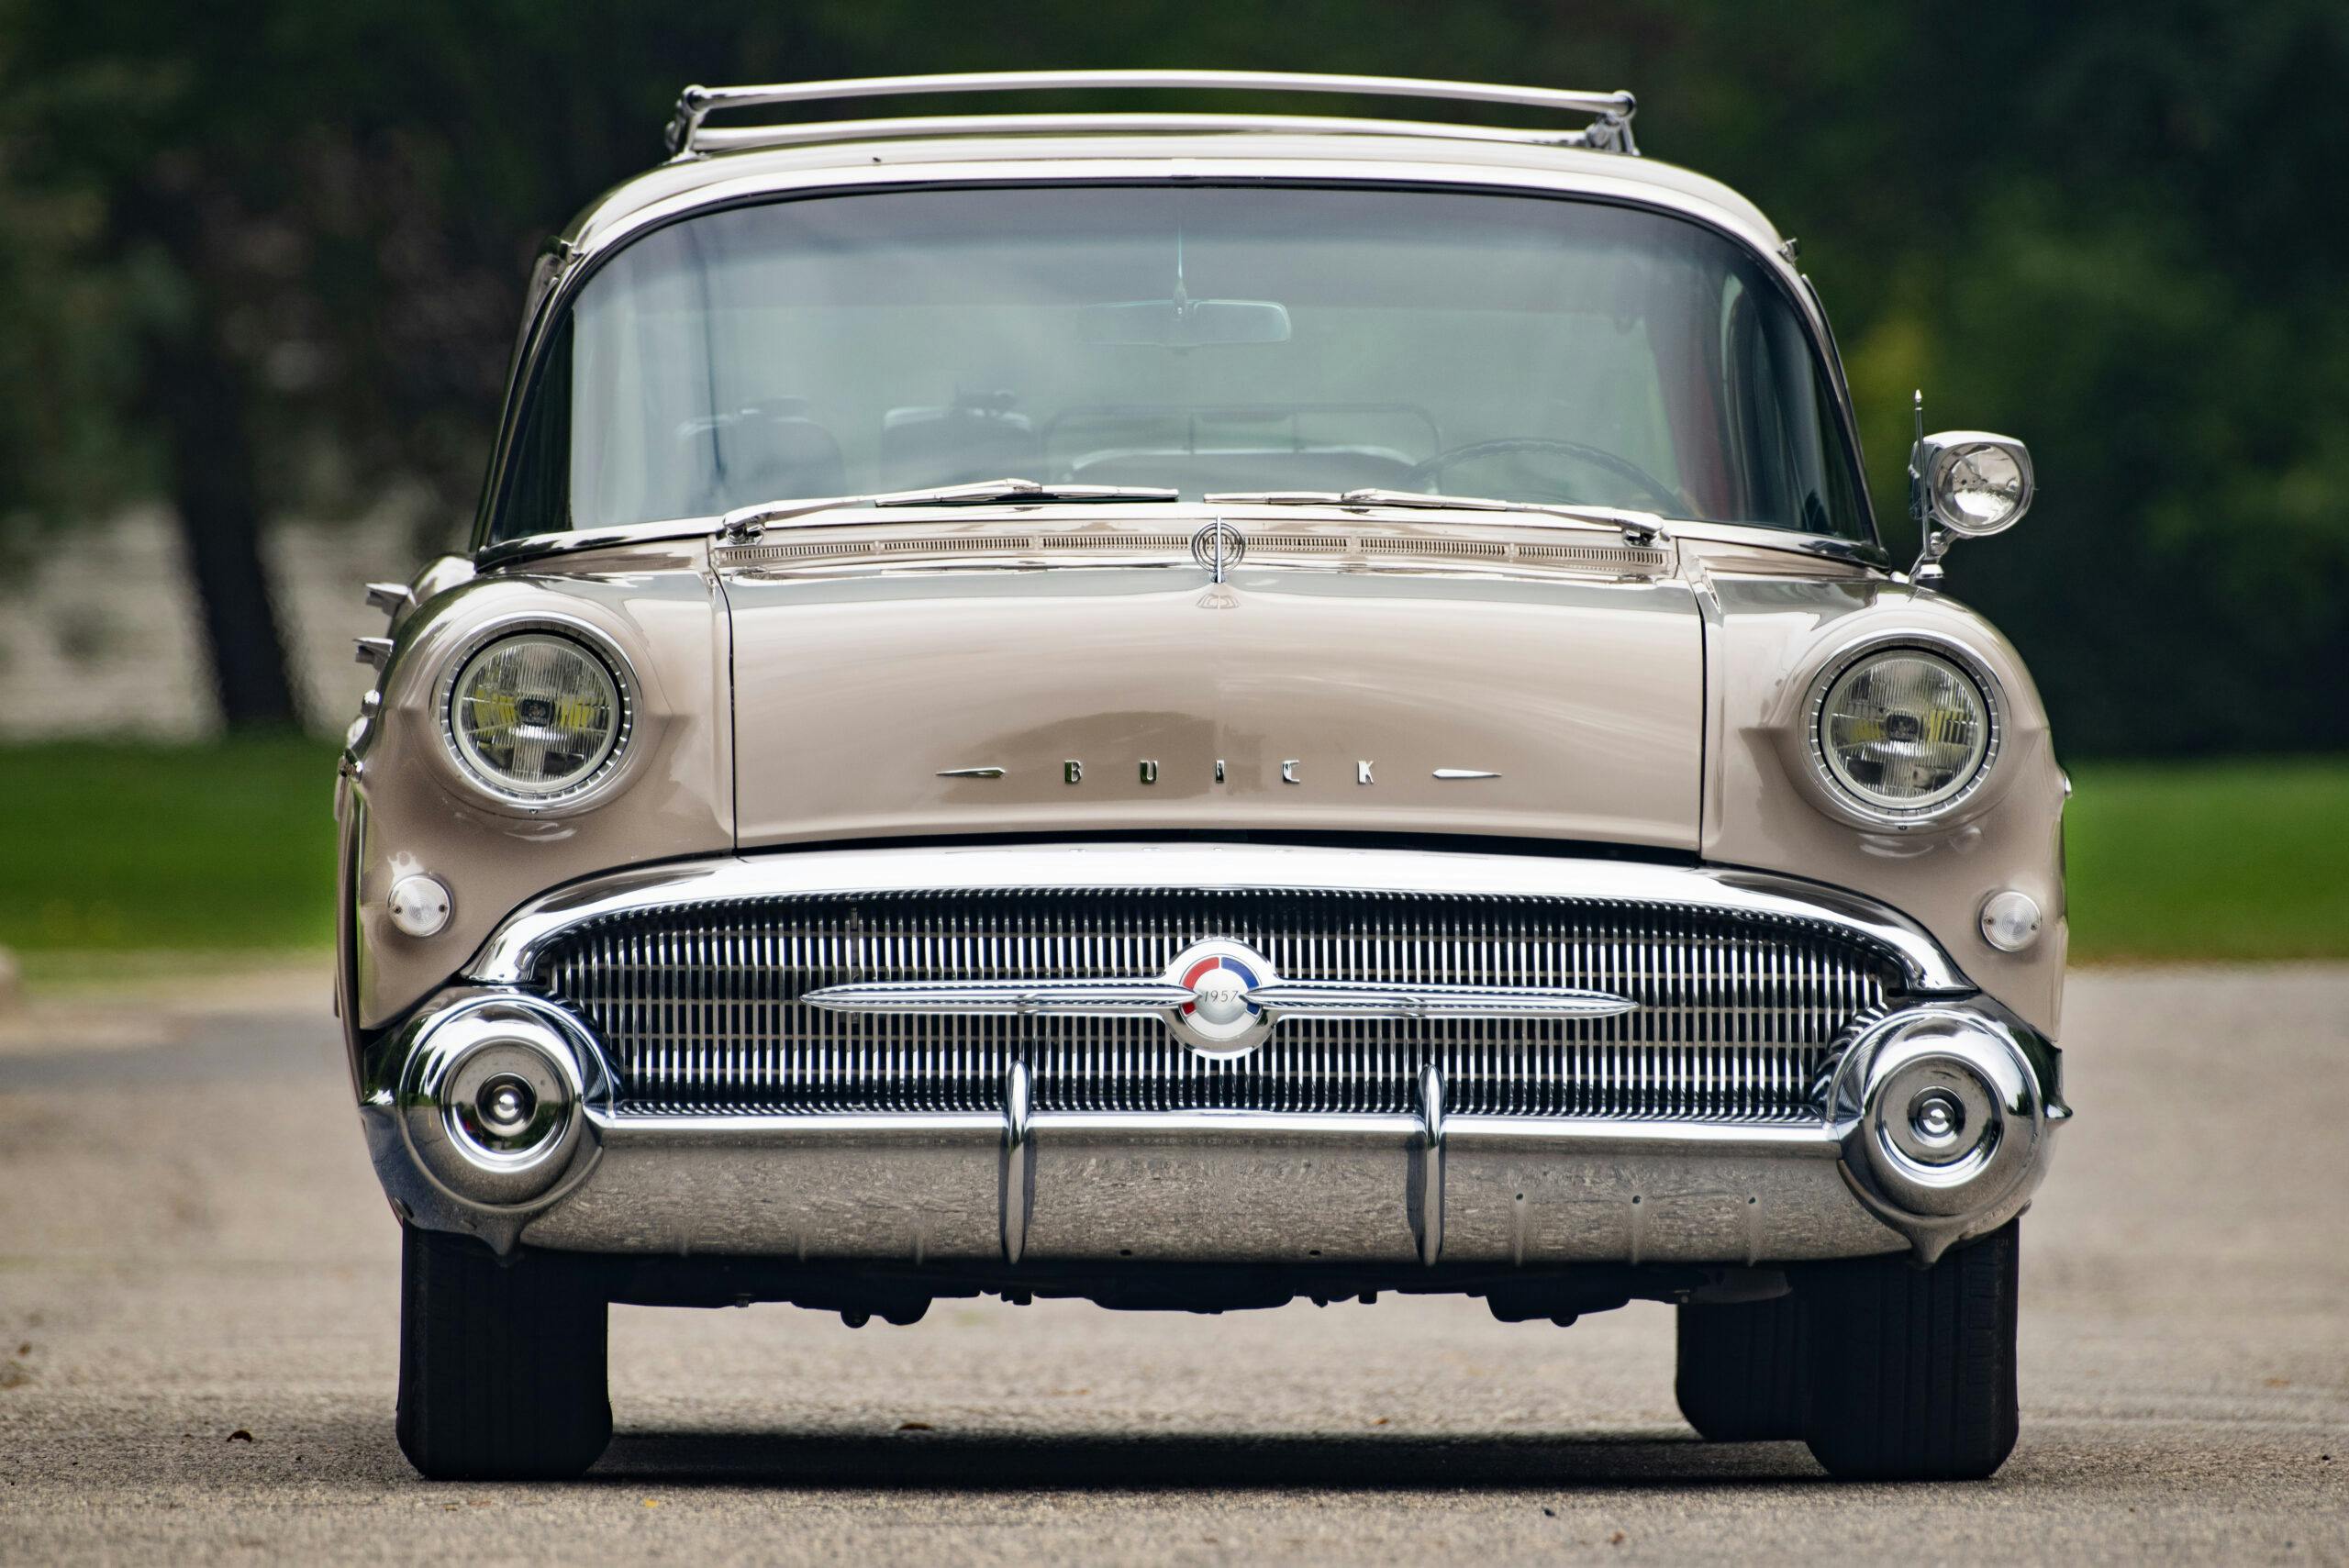 1957 Buick Estate Wagon front